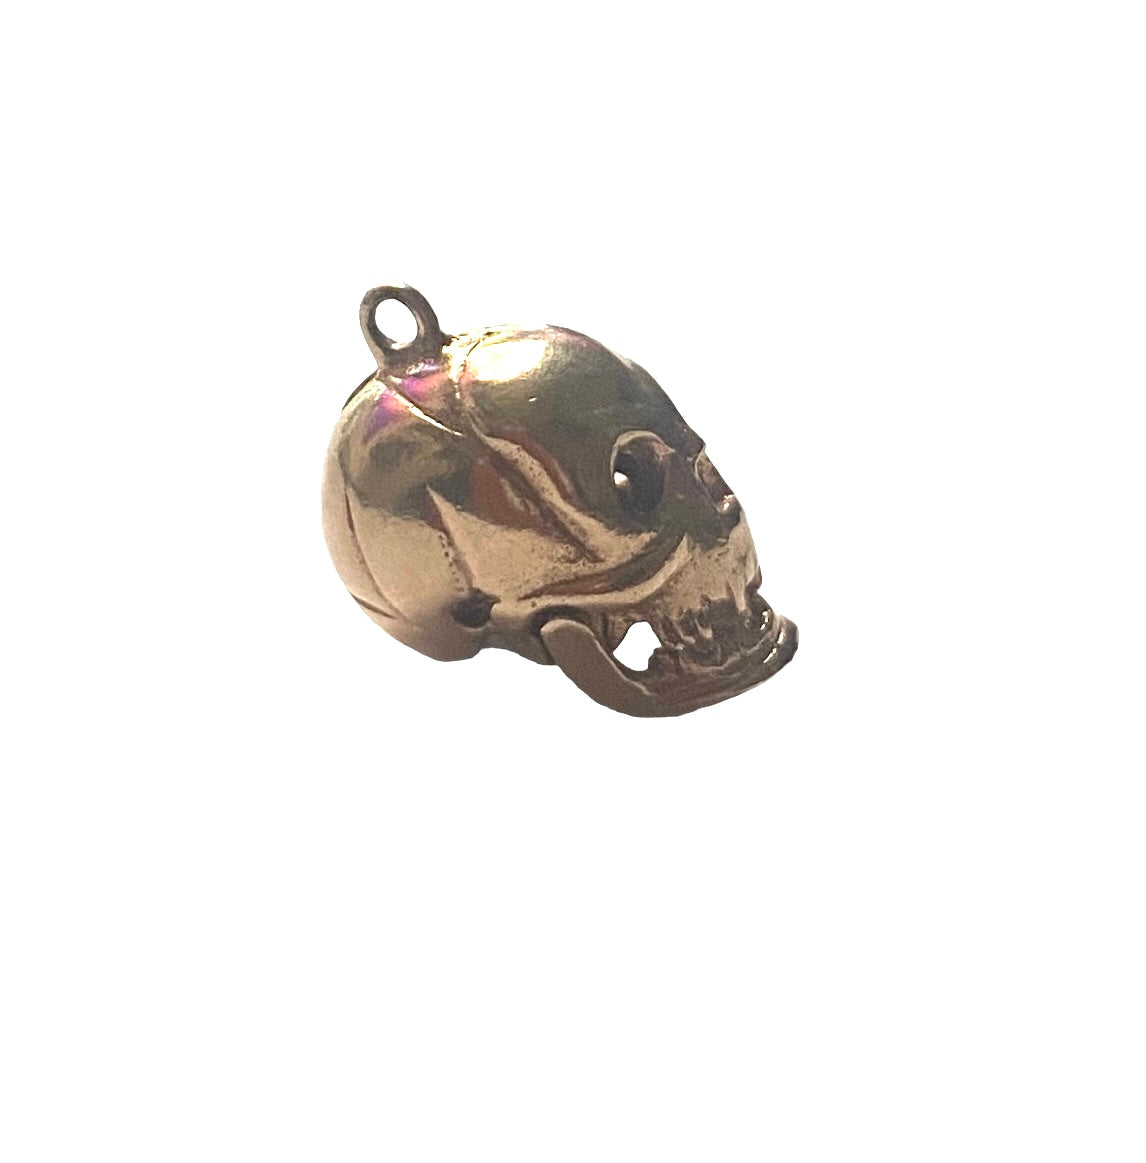 9ct vintage skull charm / pendant with articulated mouth